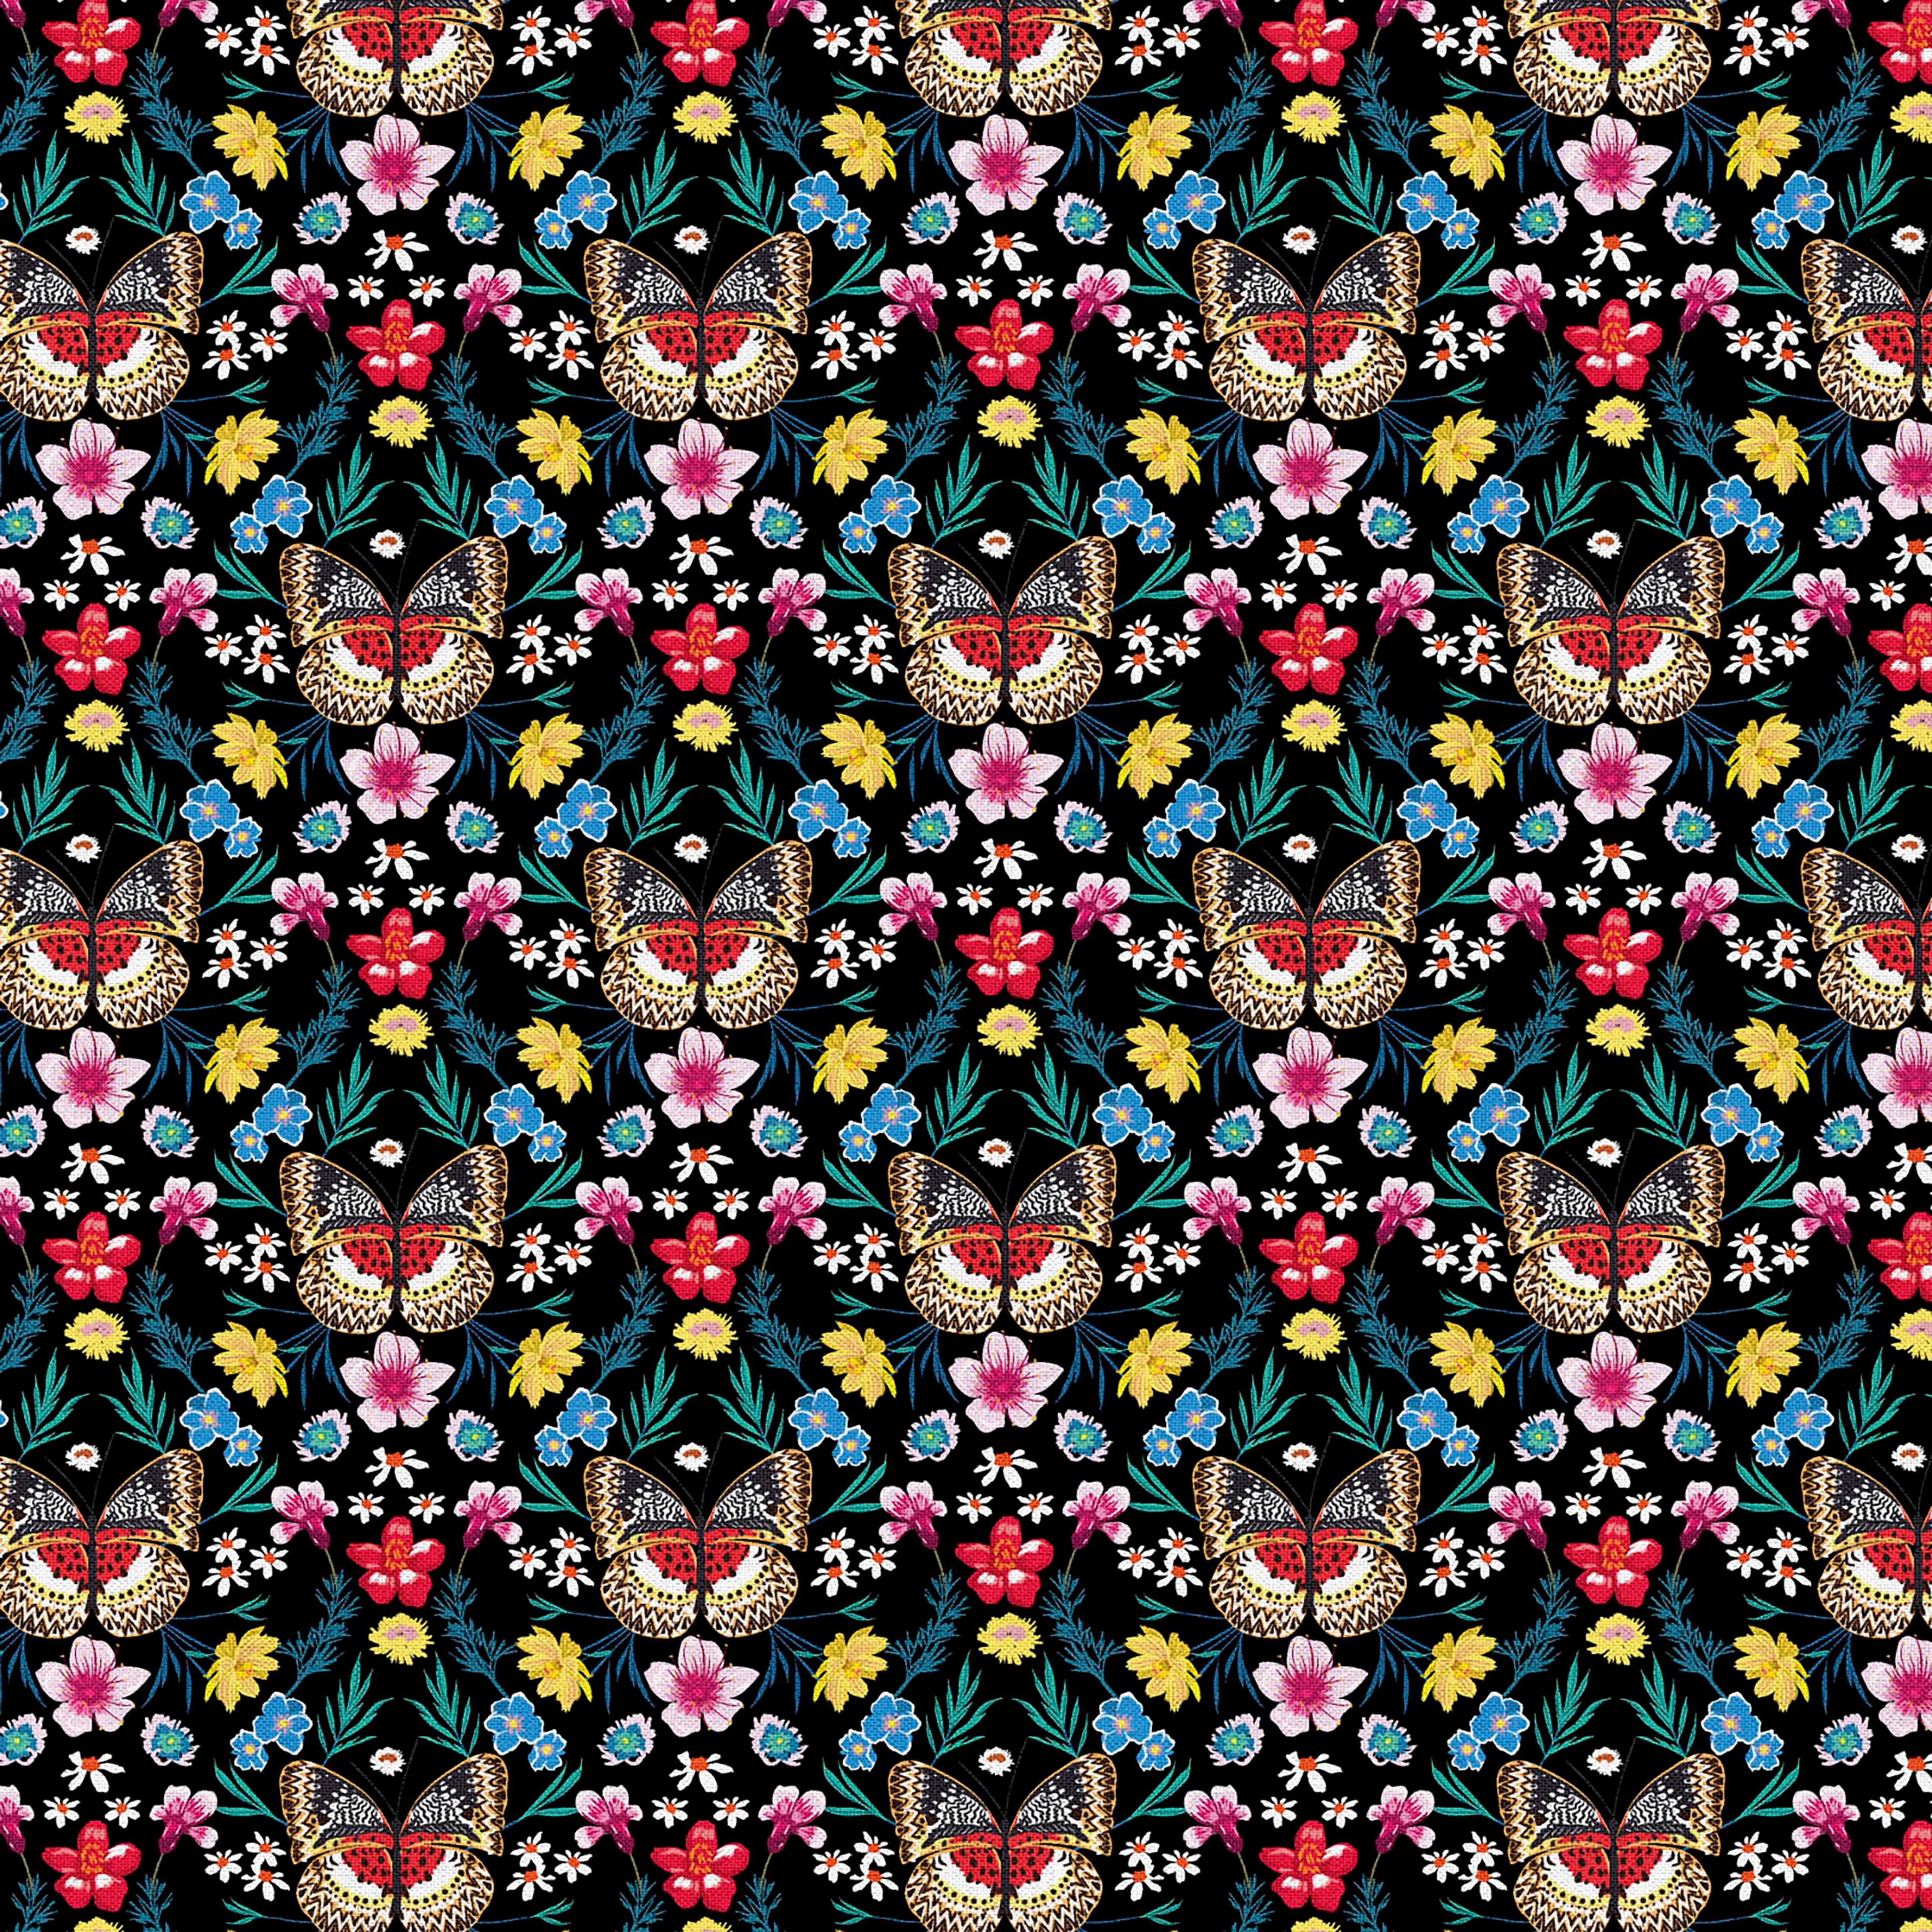 Fabric Editions Sophisticated Garden Cotton Fabric